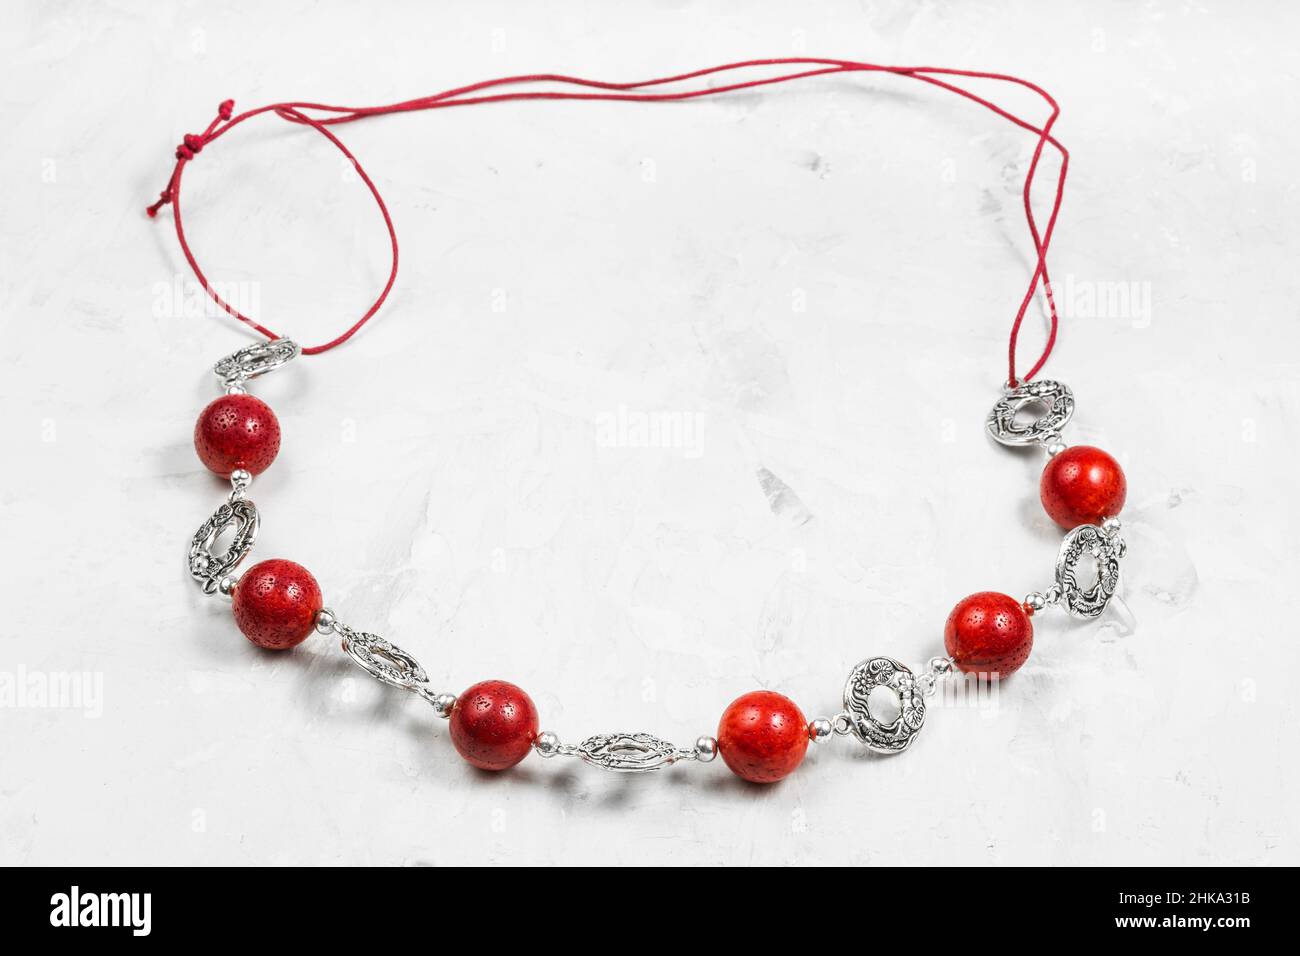 handcrafted necklace of polished red coral balls and decorated silver rings on red leather cord close up on gray concrete board Stock Photo